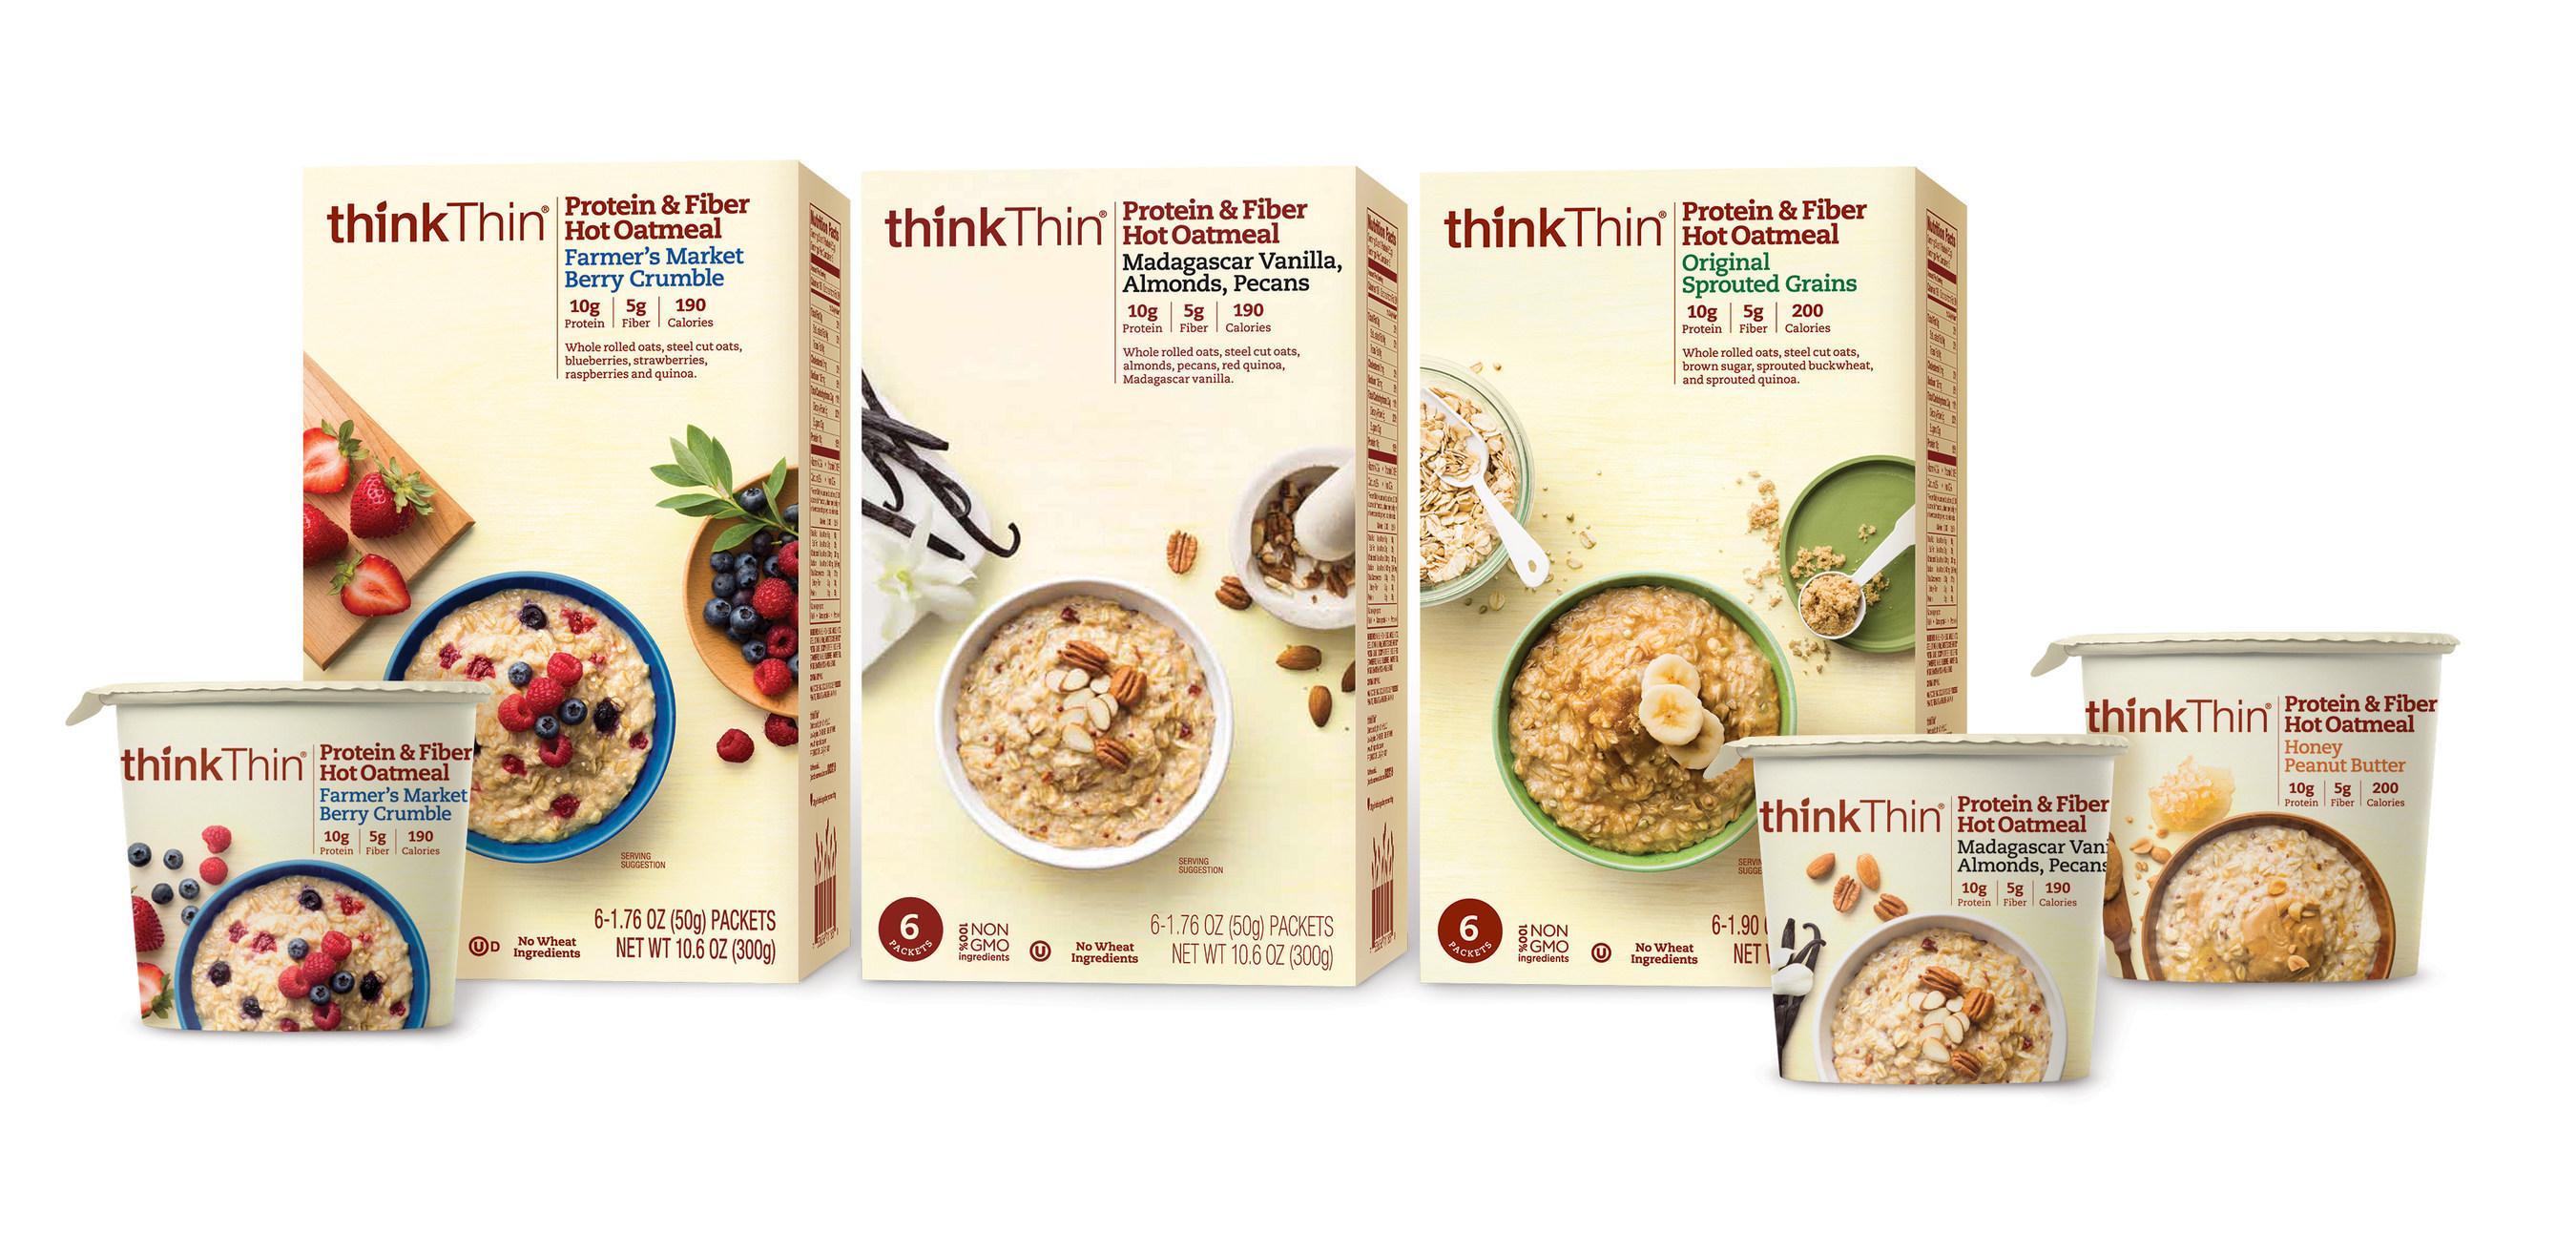 thinkThin Expands into New Category,  Launching Protein & Fiber Hot Oatmeal